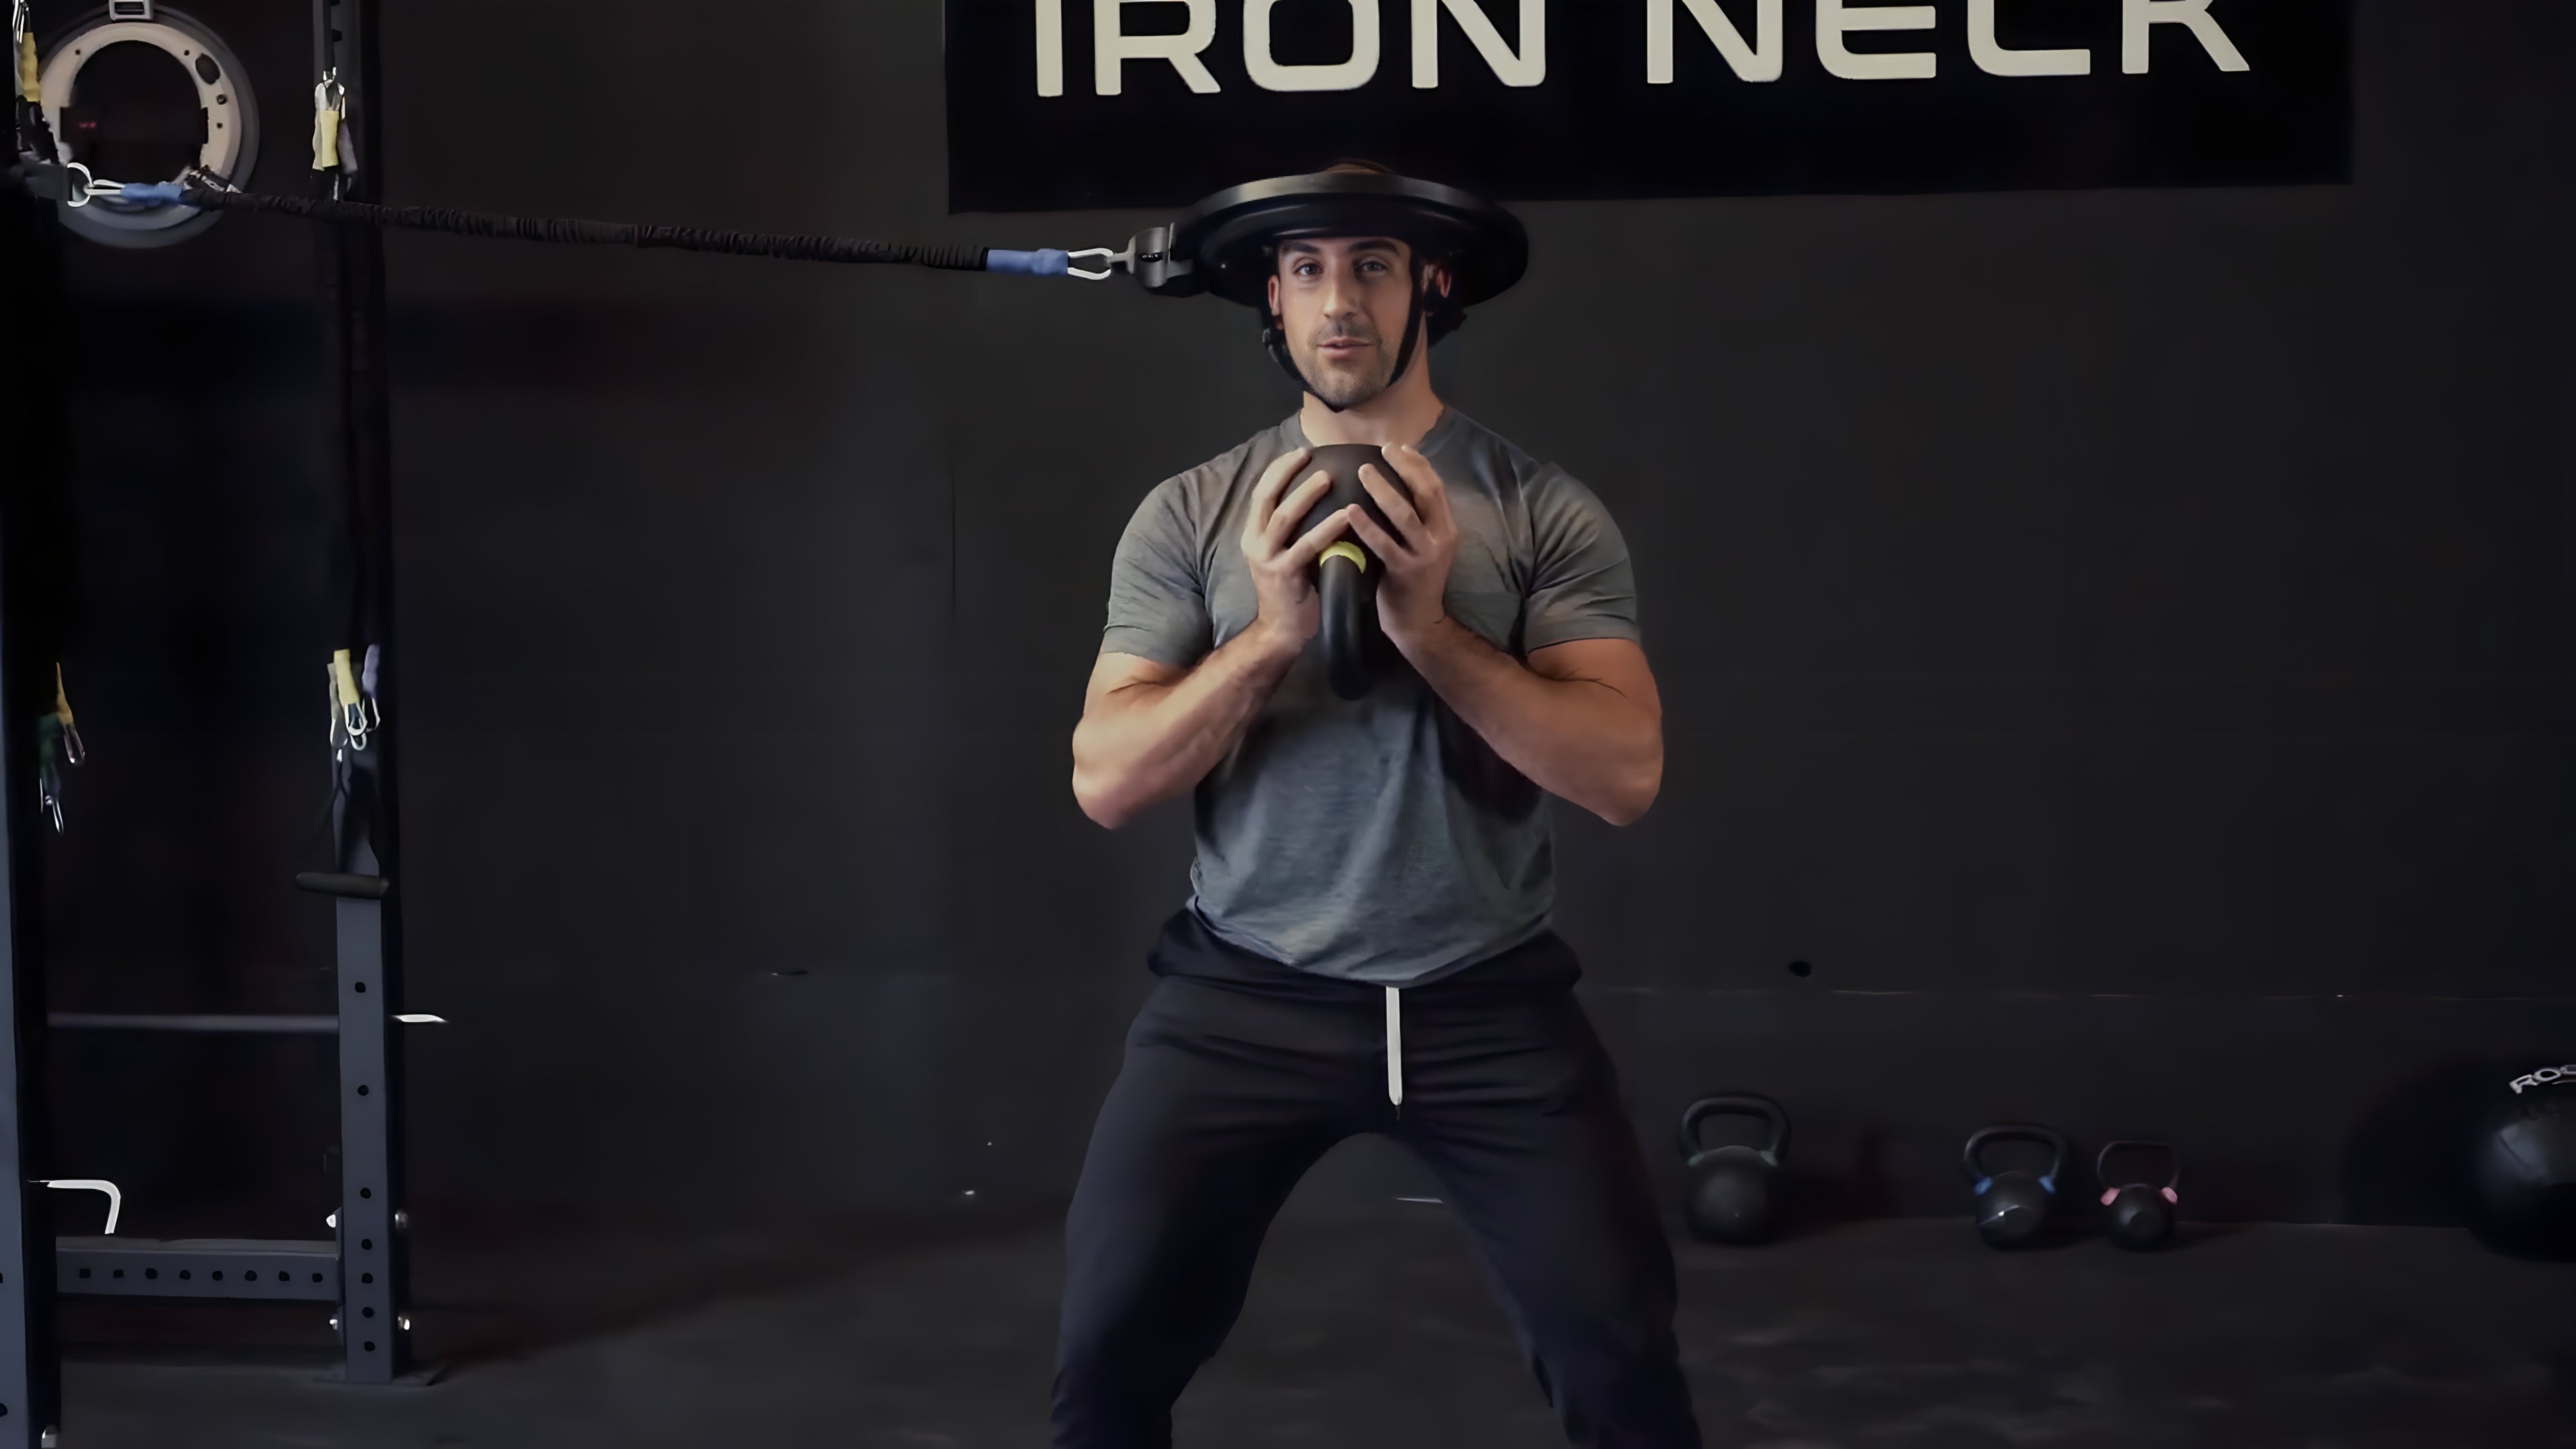 Mike Salemi wears Iron Neck on his head and holds a kettlebell with both hands on his chest.